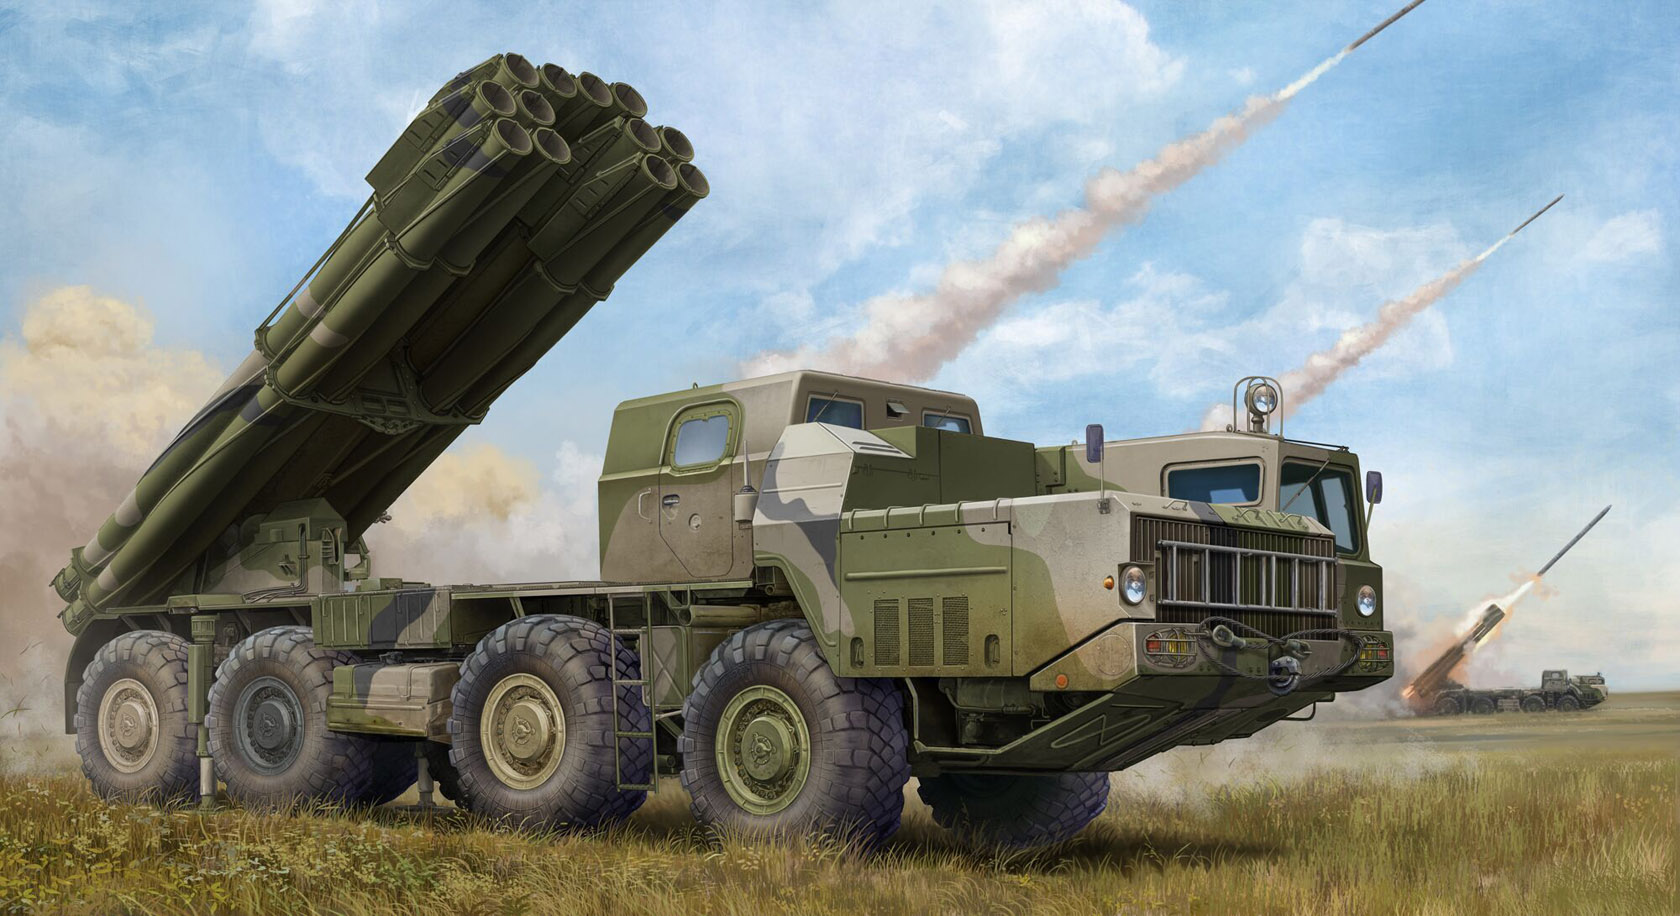 General 1680x916 army military rocket military vehicle sky clouds missiles side view artwork 9K515 Tornado-S